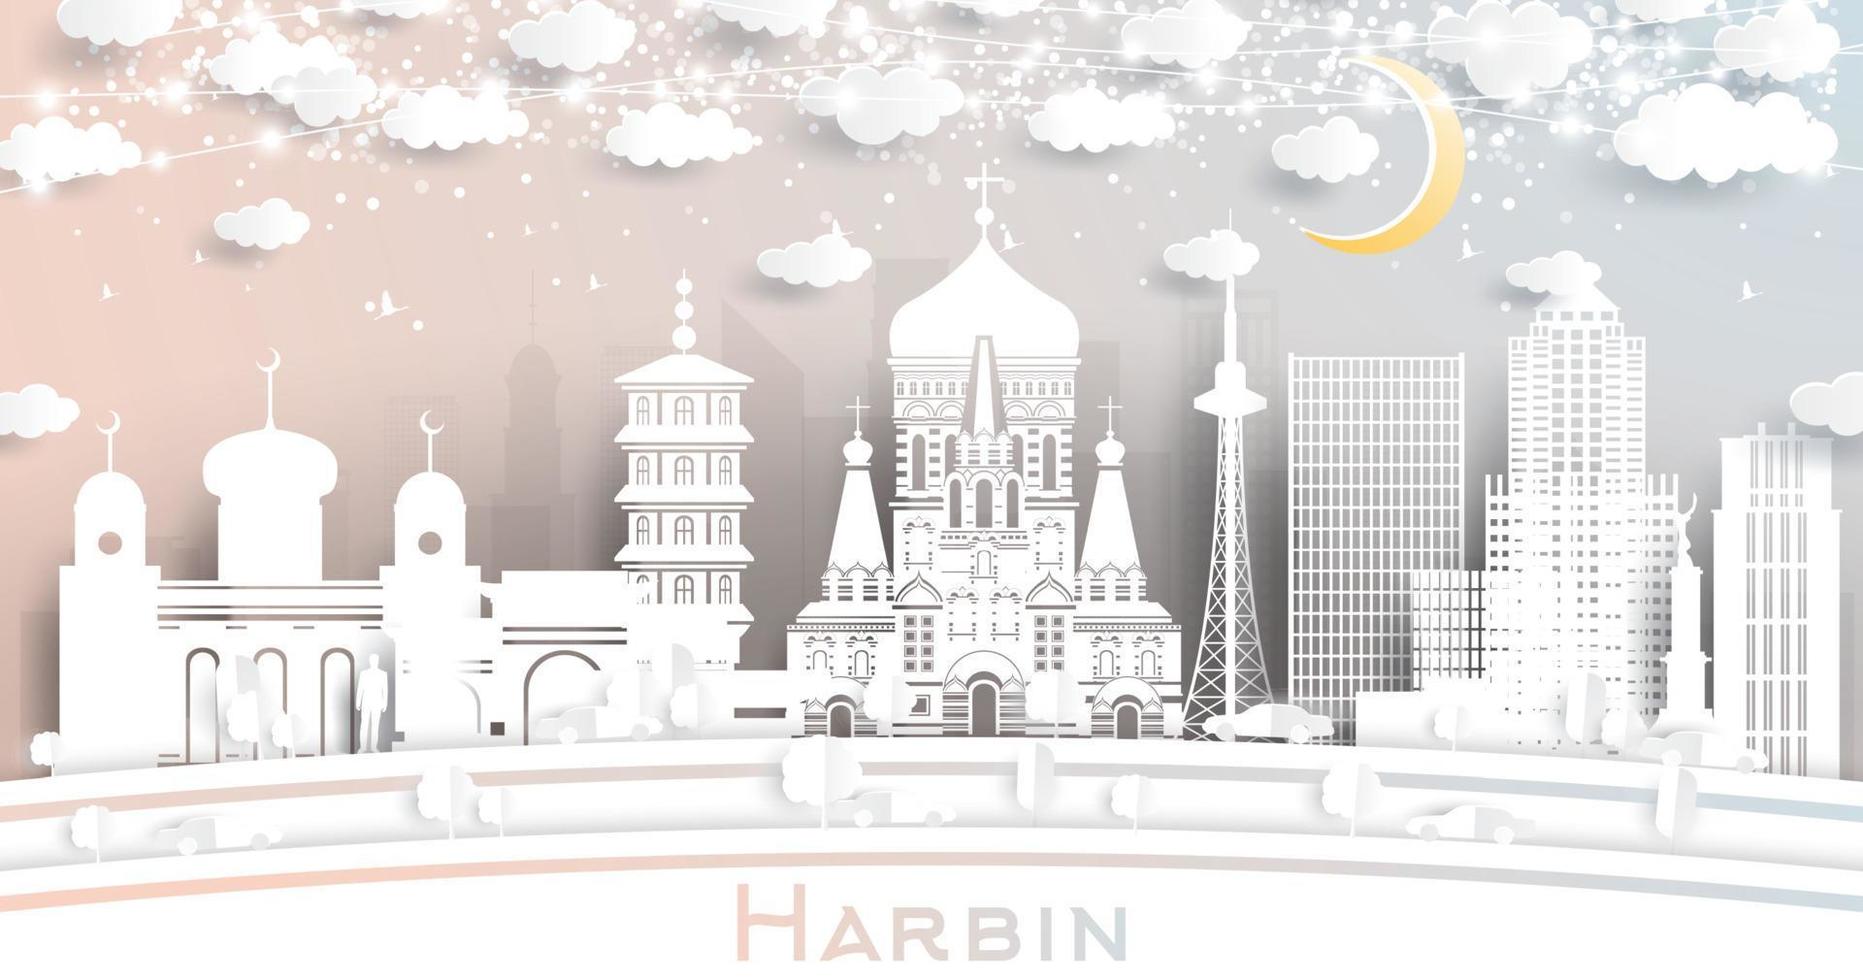 Harbin China City Skyline in Paper Cut Style with White Buildings, Moon and Neon Garland. vector